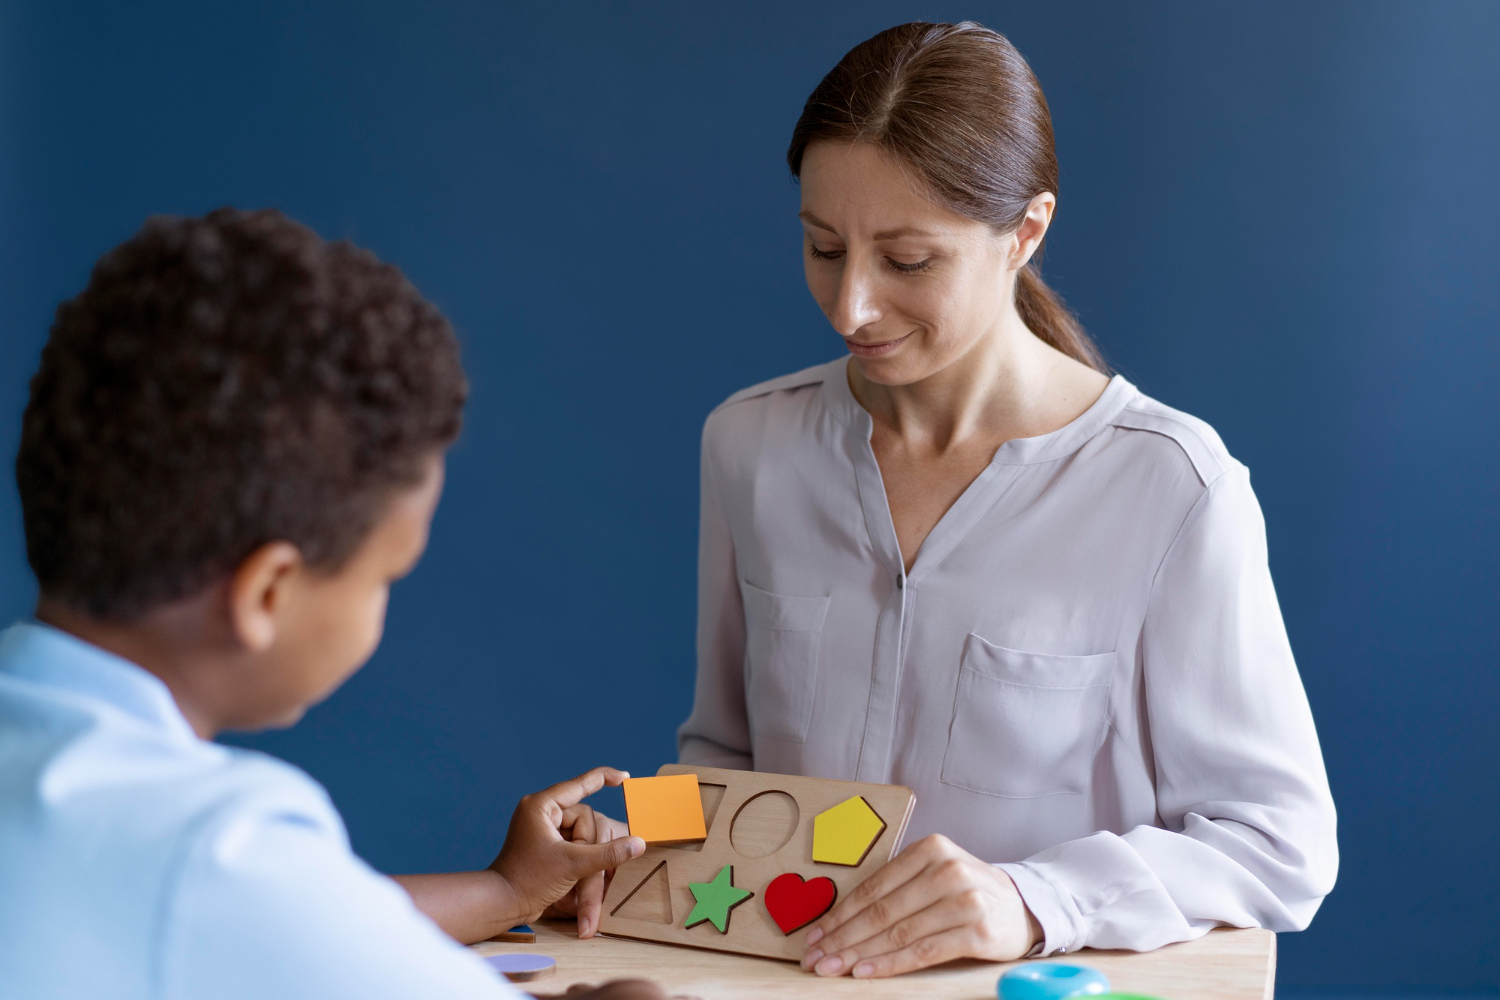 Applied Behavior Analysis (ABA) is often hailed as the gold standard in autism therapy.